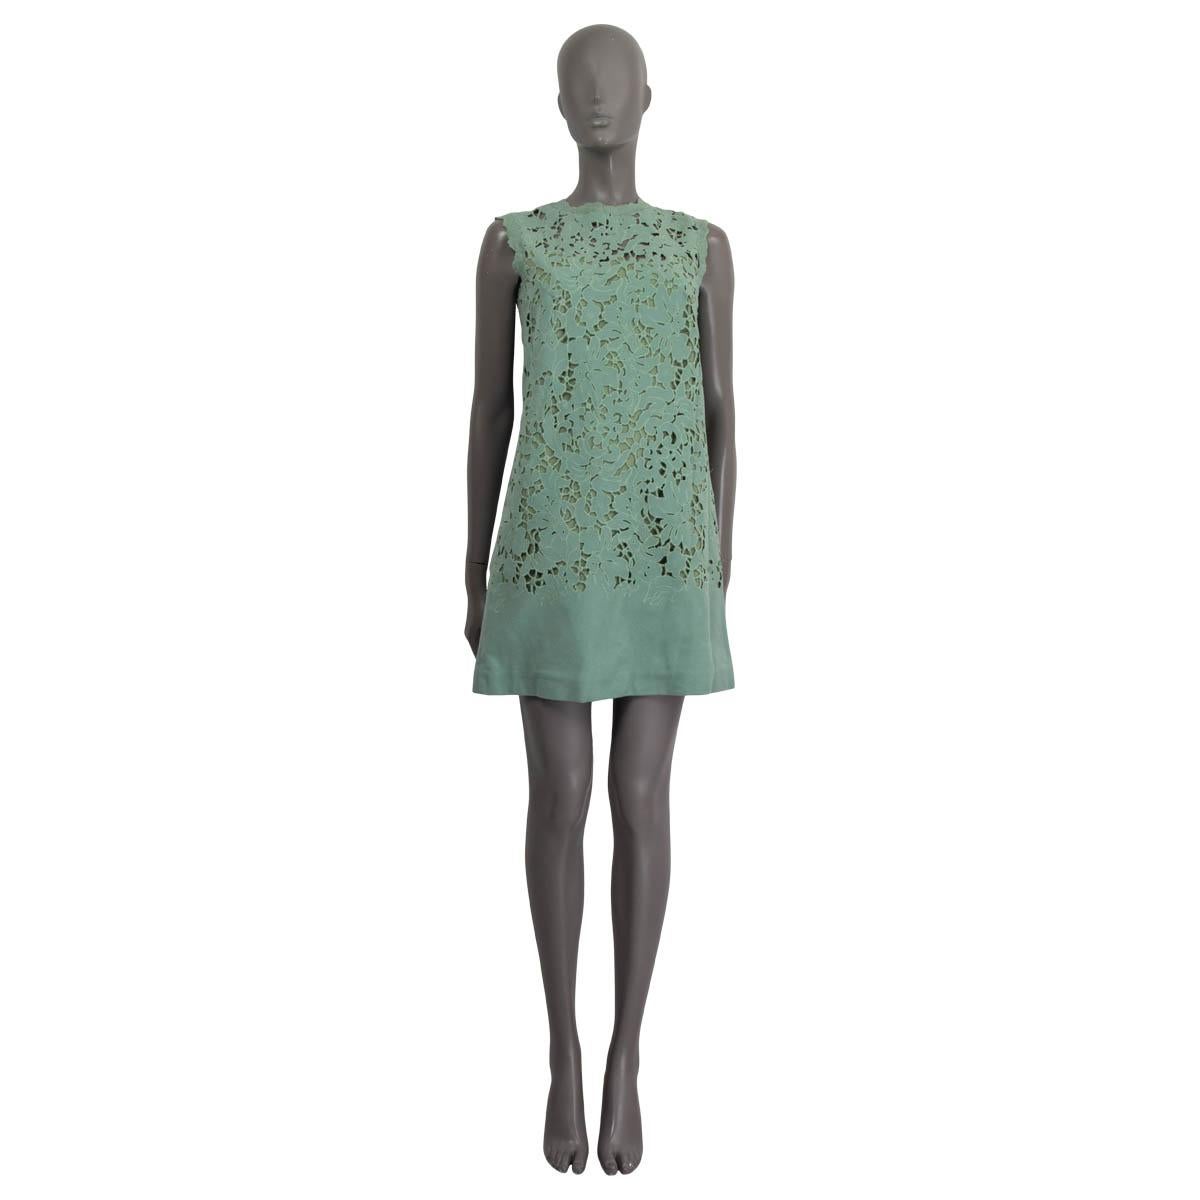 100% authentic Ermanno Scervino sleeveless shift dress in mint virgin wool (100%). Embellished with embroidered lace all over the dress. Opens with a concealed zipper on the back. Lined in mint silk (97%) and elastane (3%). Has been worn and is in